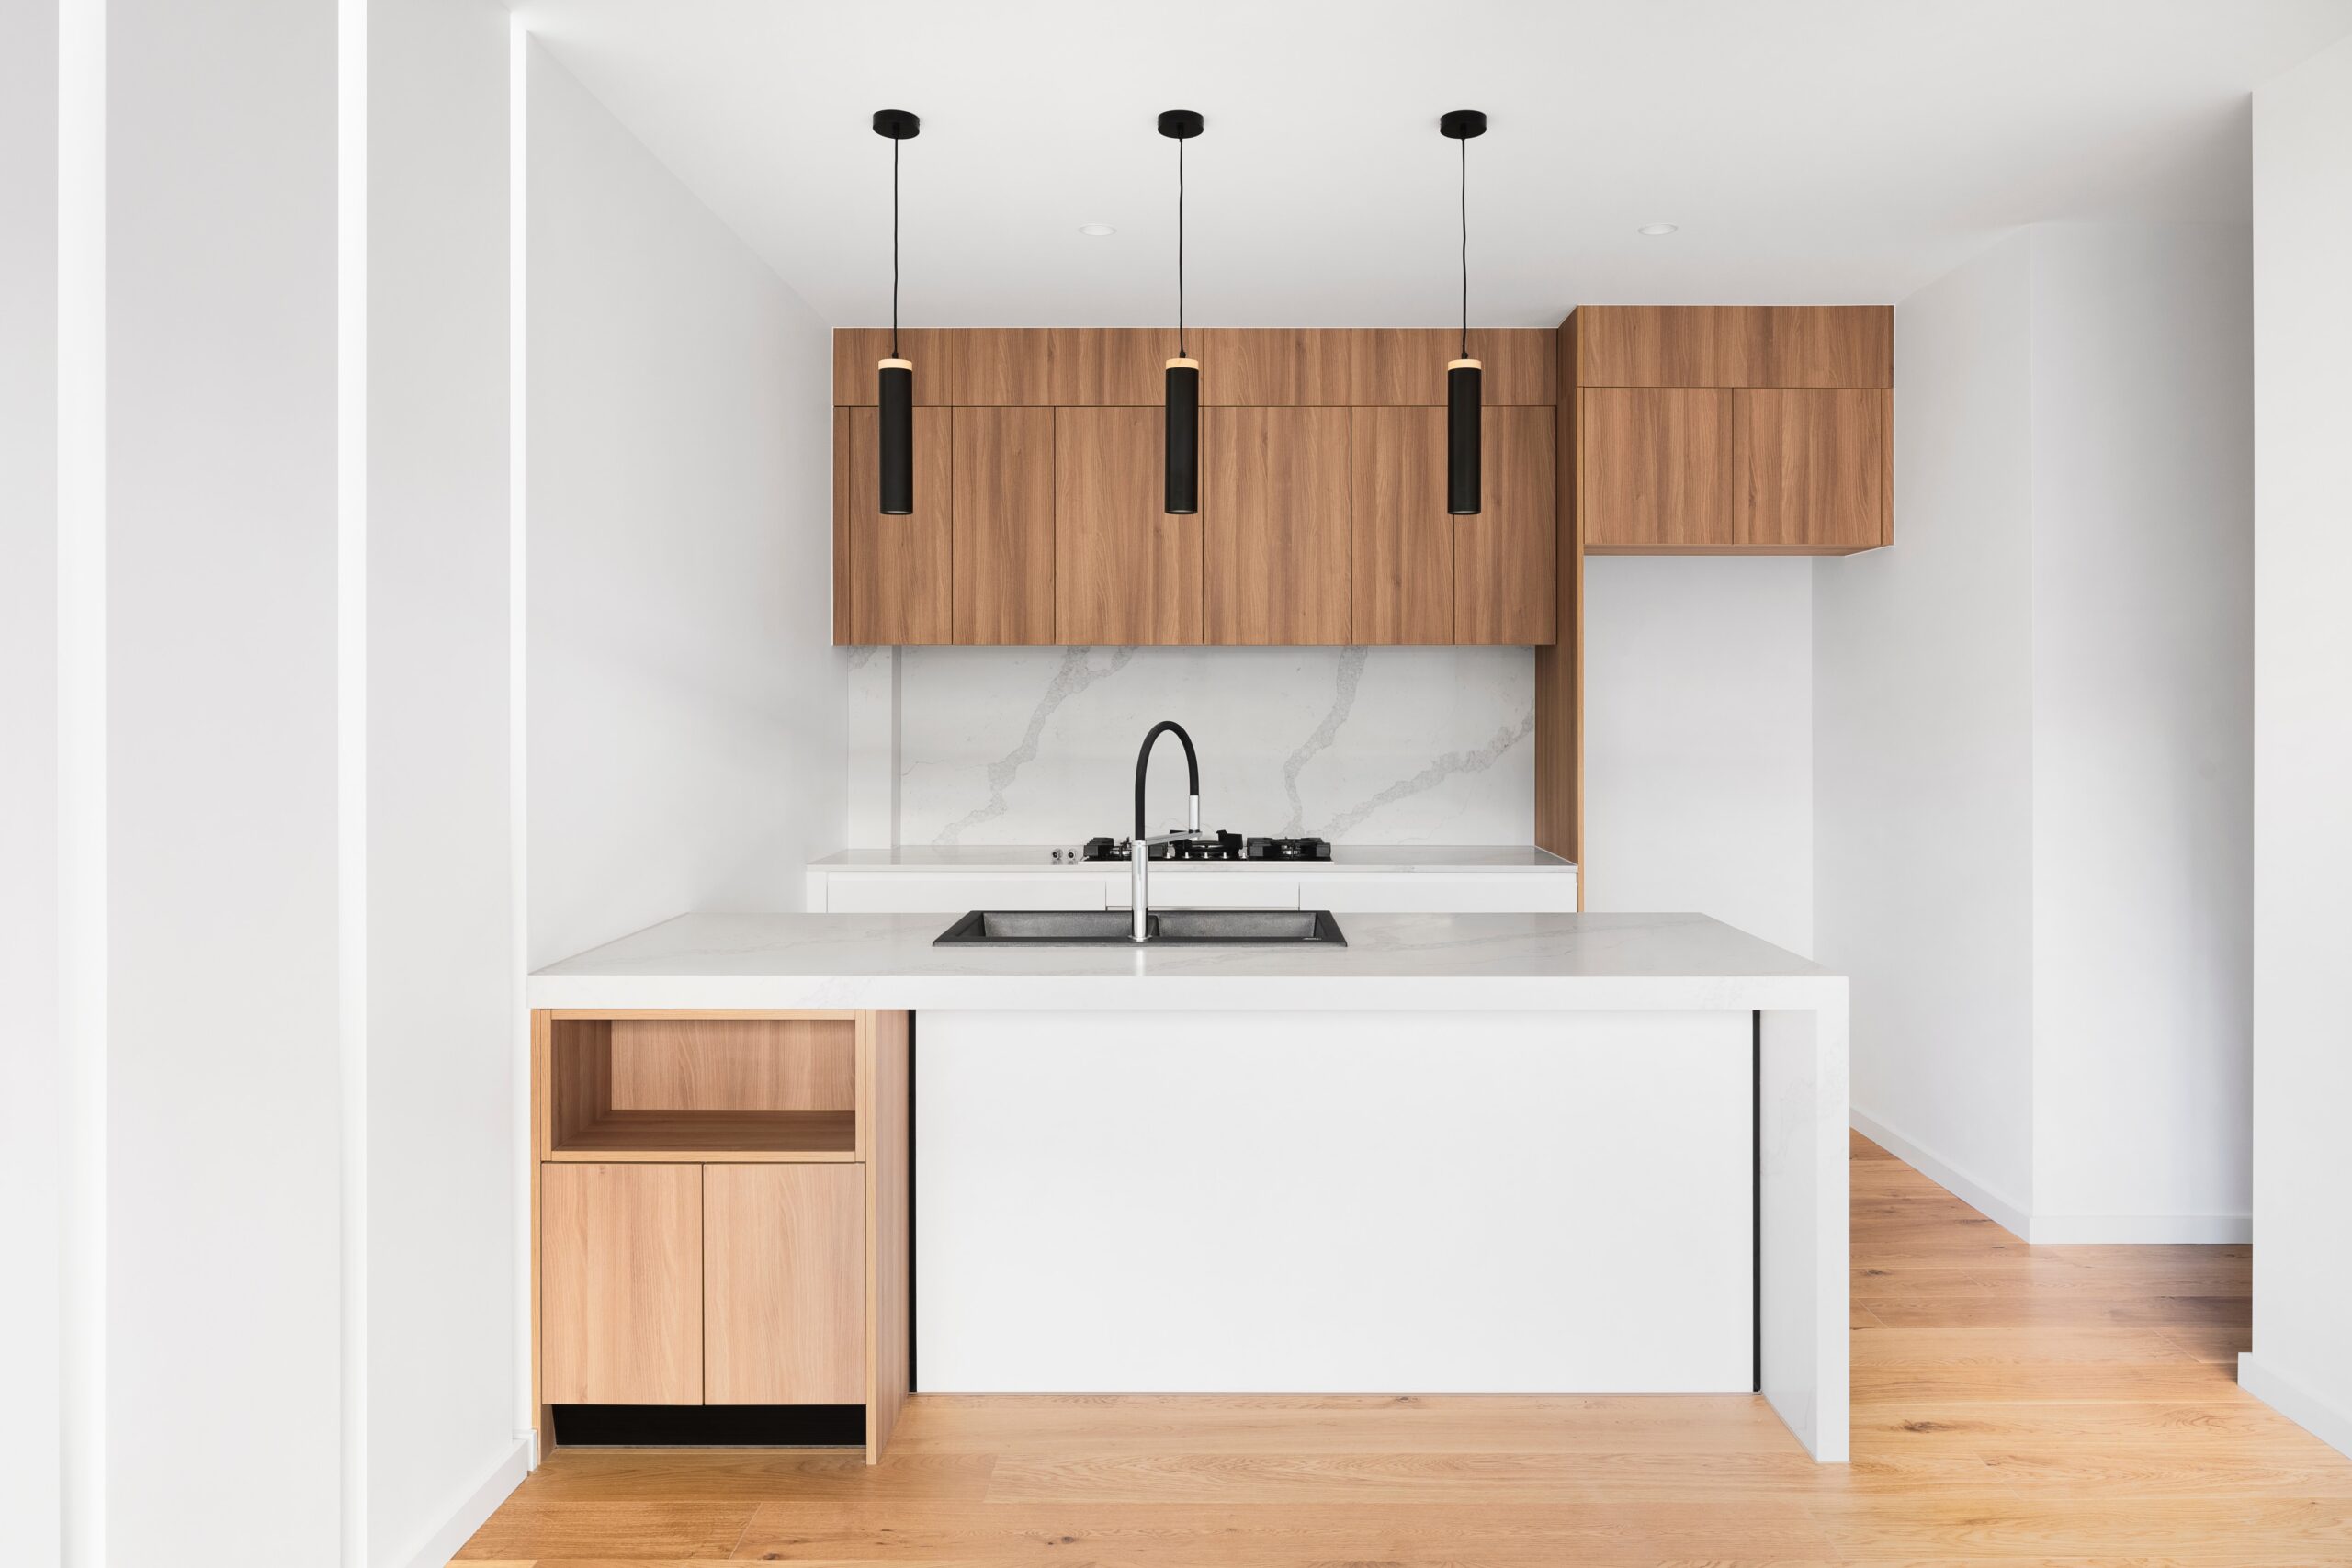 r architecture M66lRZPX hU unsplash scaled Recipe for Renovation: 6 Tips to Turn Your Kitchen Dreams Into Reality